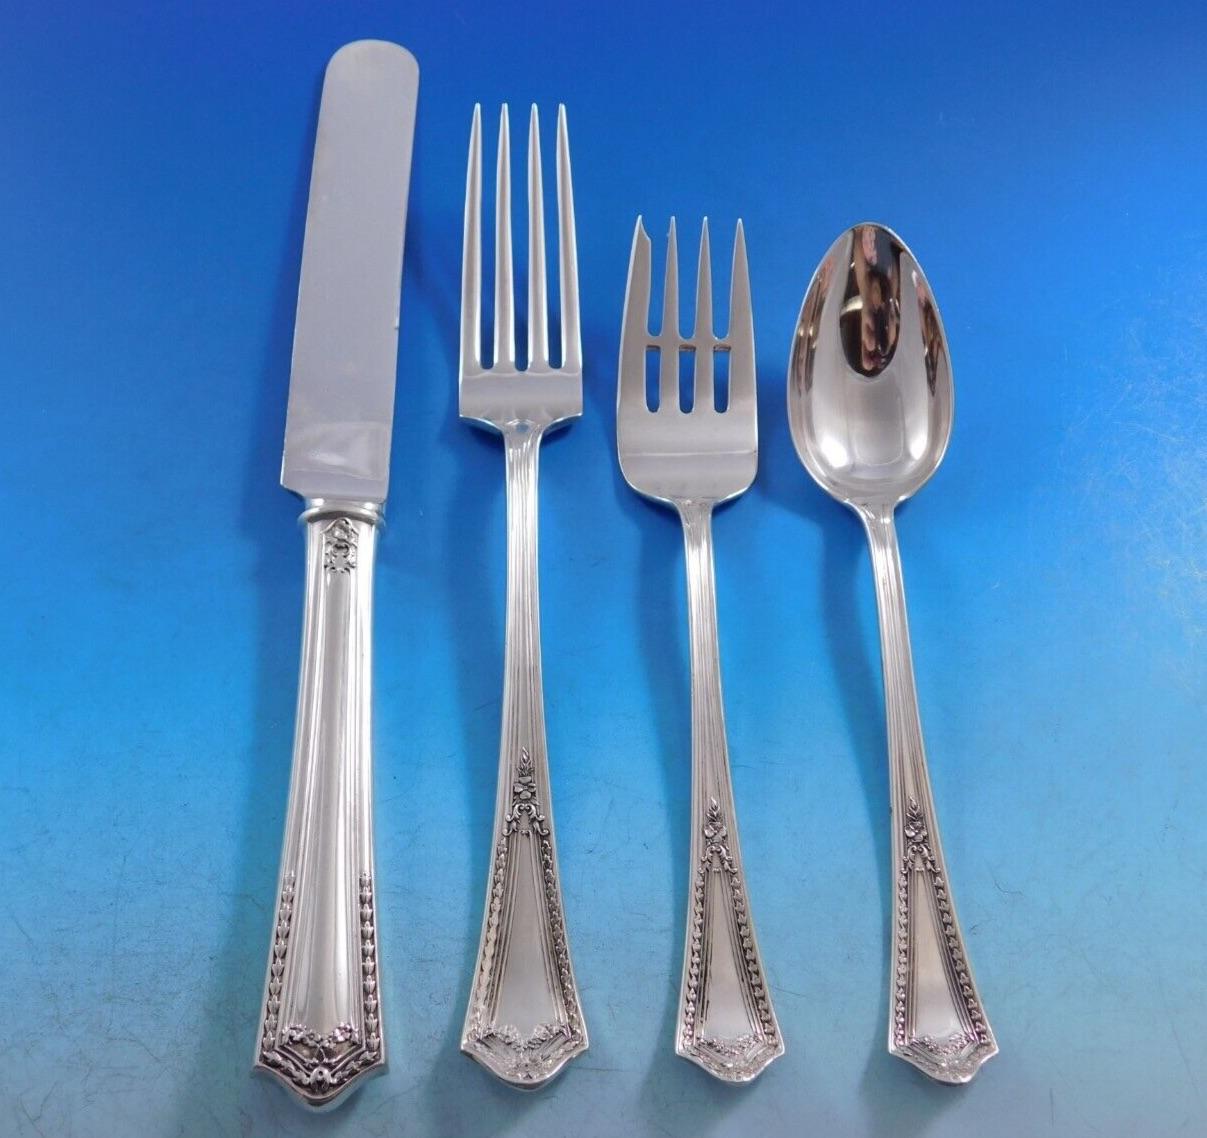 Dinner & Lunecheon size Chesterfield by International, circa 1914, sterling silver Flatware set - 52 pieces. Great starter set! This set includes:
6 Dinner Size Knives, blunt, 9 5/8